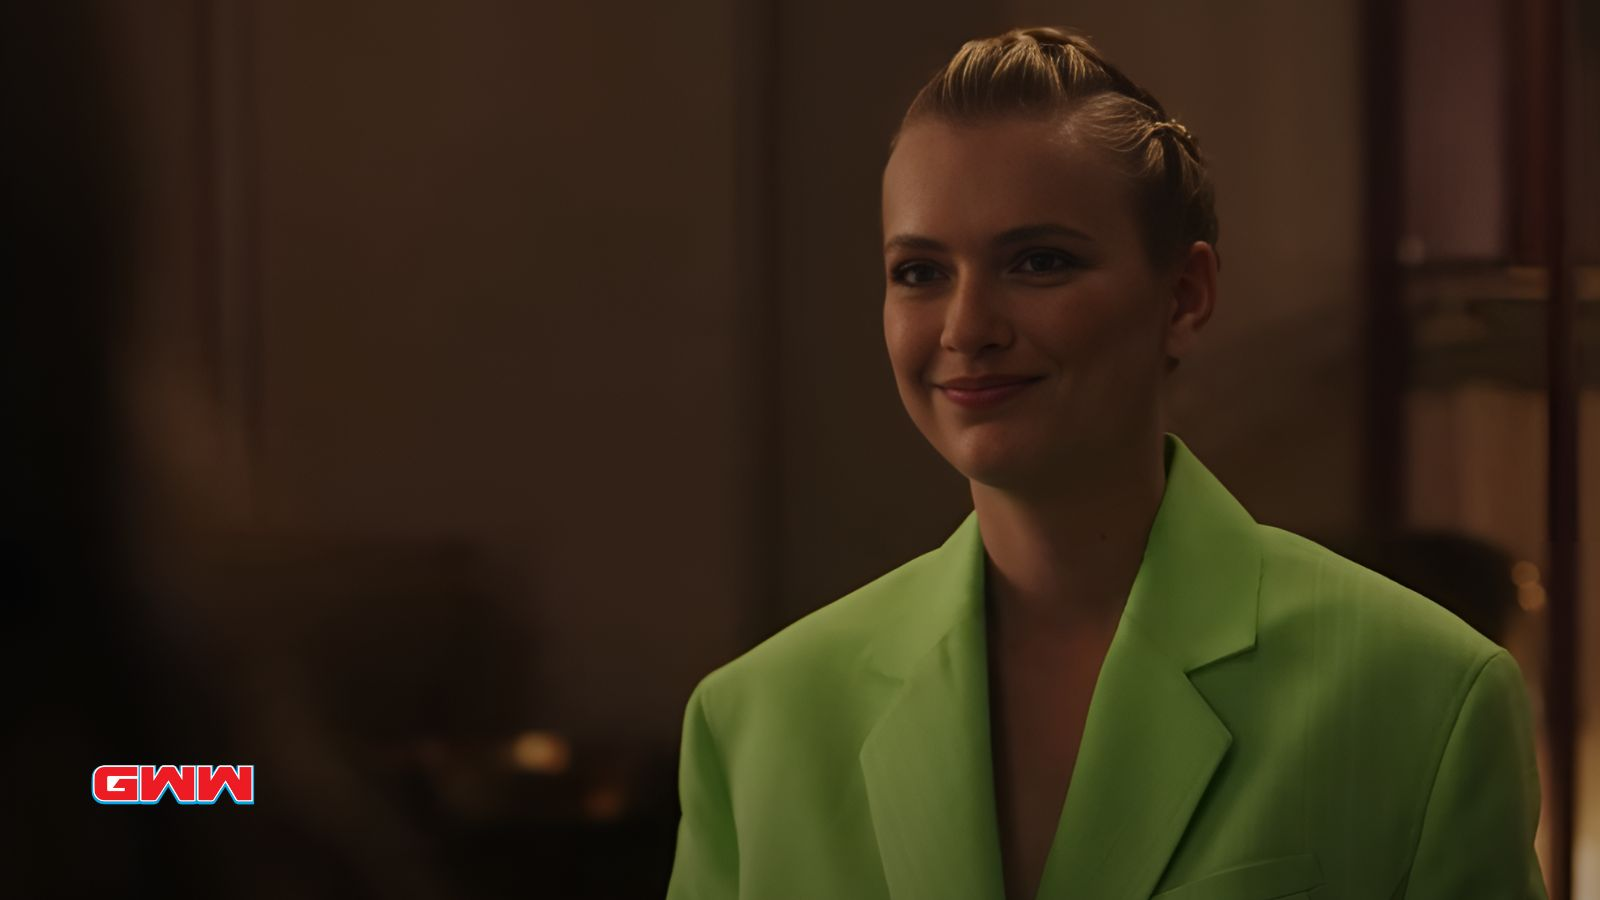 Camille in a bright green blazer smiling softly in a dimly lit room.